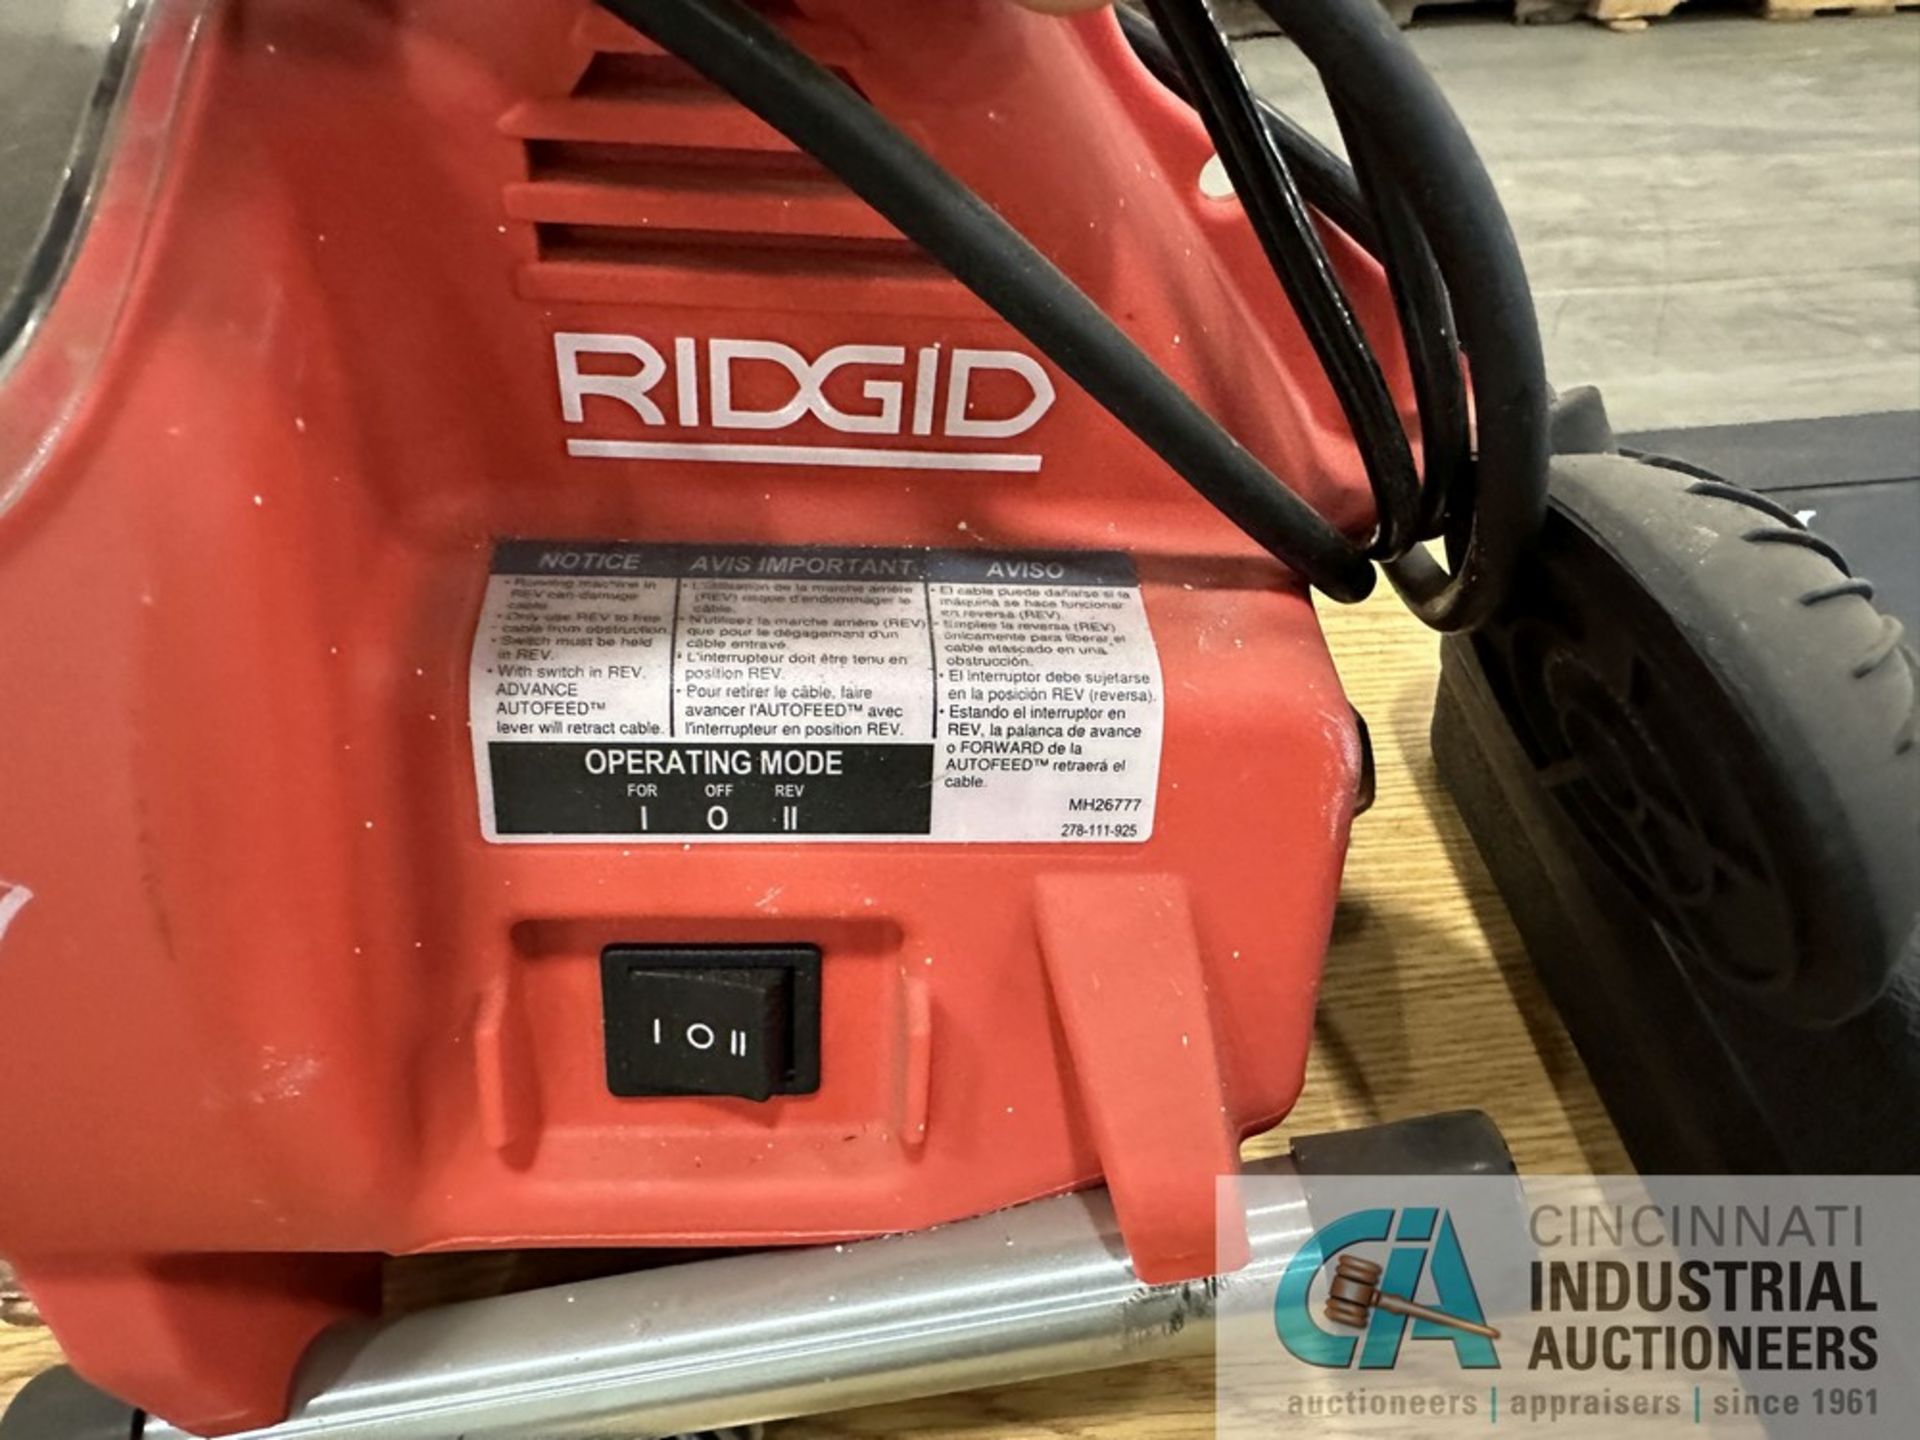 RIDGID MODEL MH2667 ELECTRIC DRAIN CLEANER - Image 2 of 4